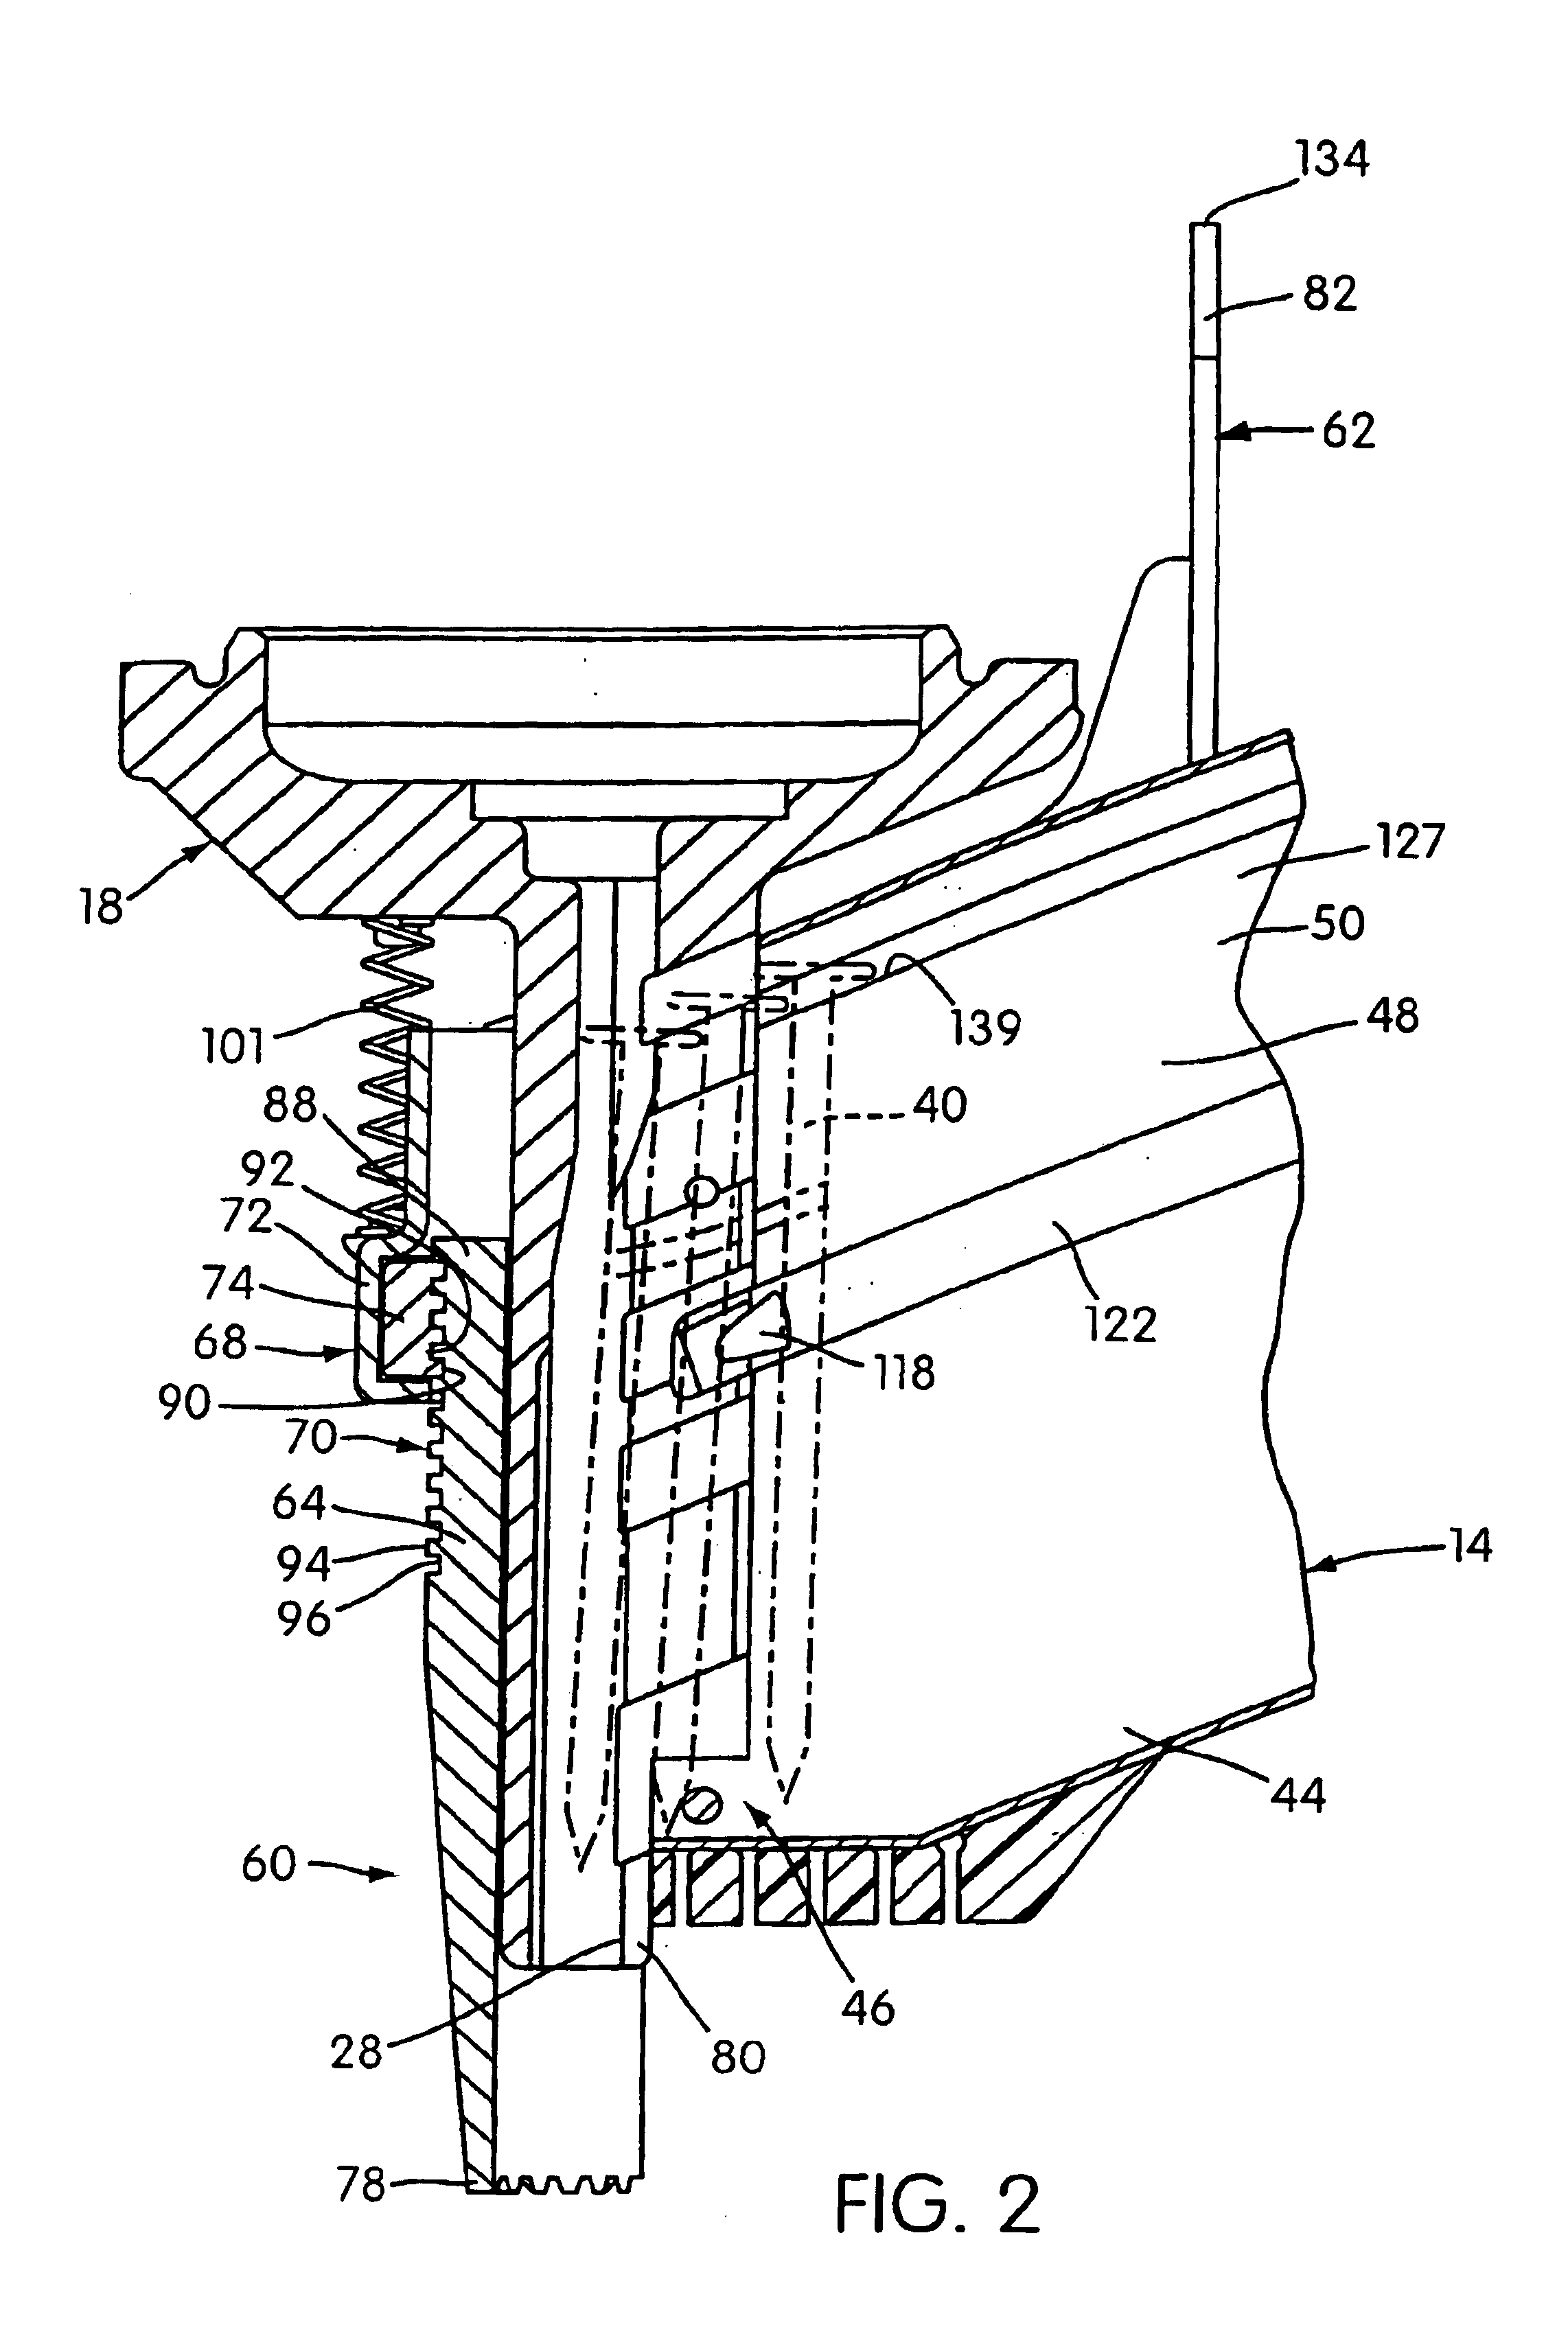 Safety trip assembly and trip lock mechanism for a fastener driving tool